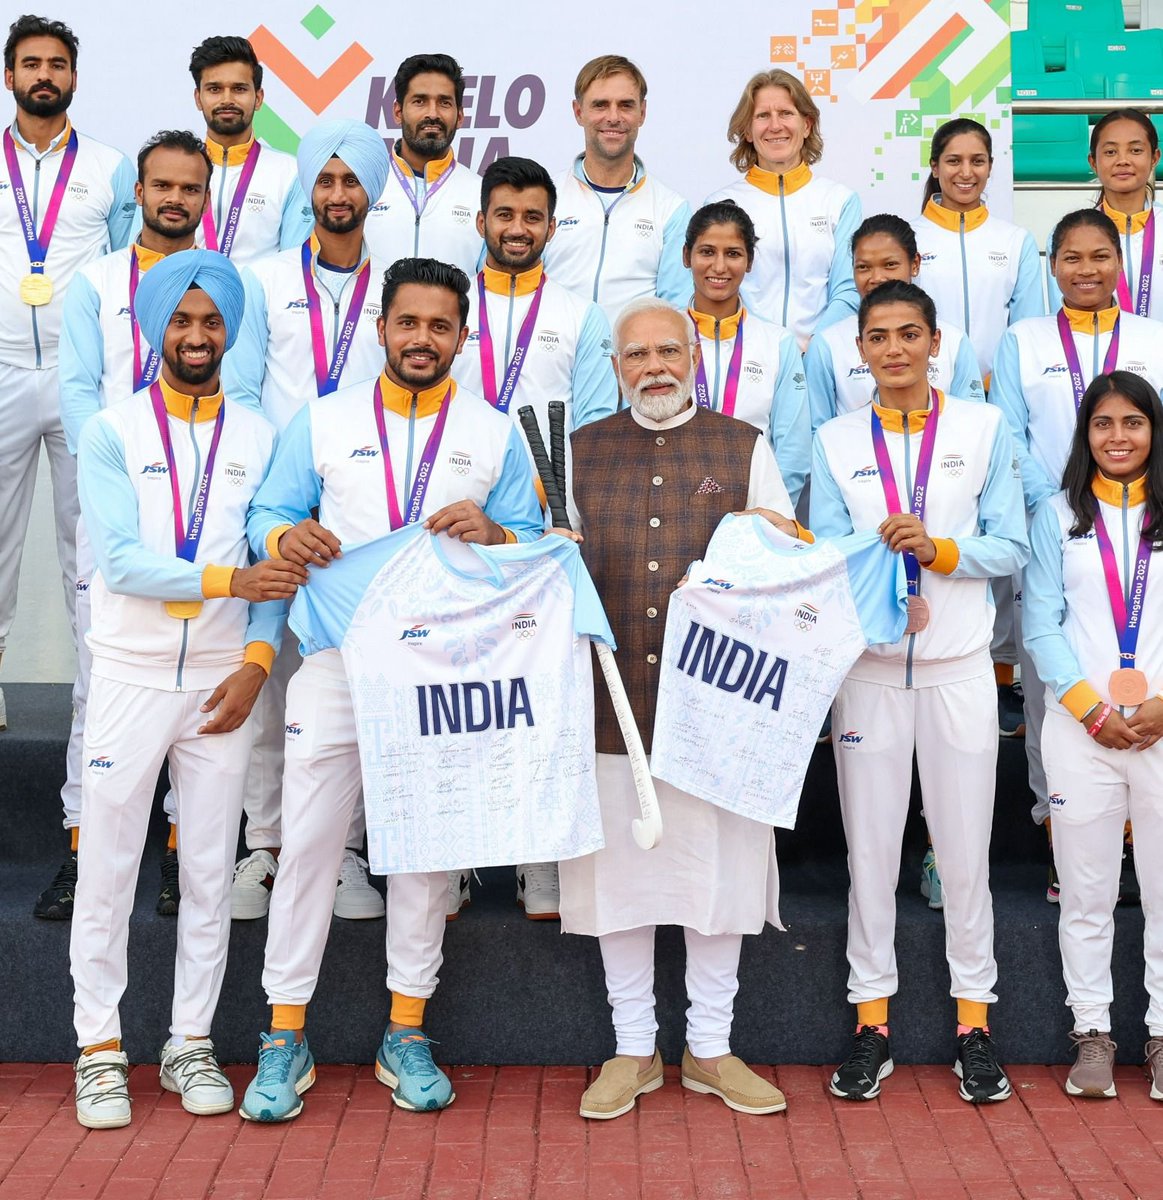 Glimpses from the very special meeting with our Asian Games contingent, their coaches and support staff. The unwavering spirit, dedication and the countless hours of hard work of every athlete is inspiring. The accomplishments of our athletes have not just added to India's…